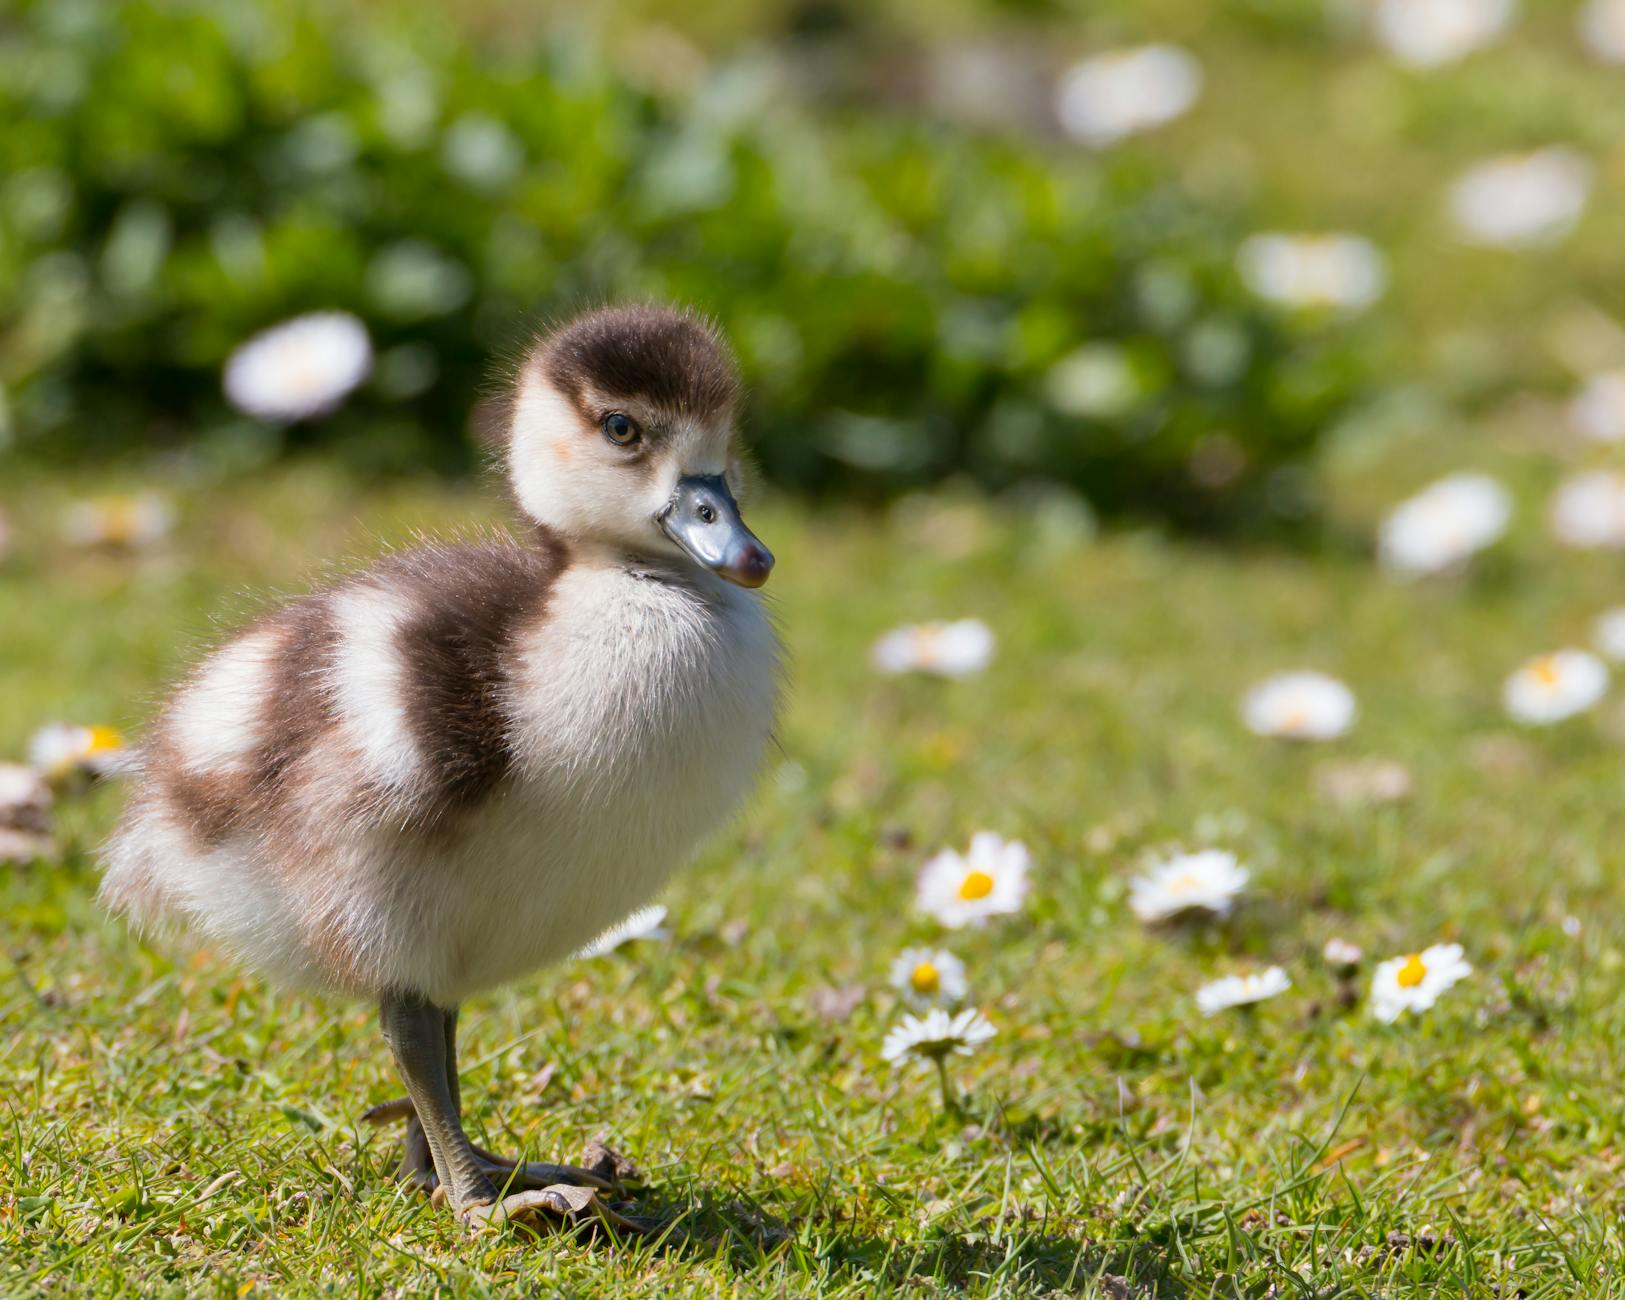 close up photo of a duckling